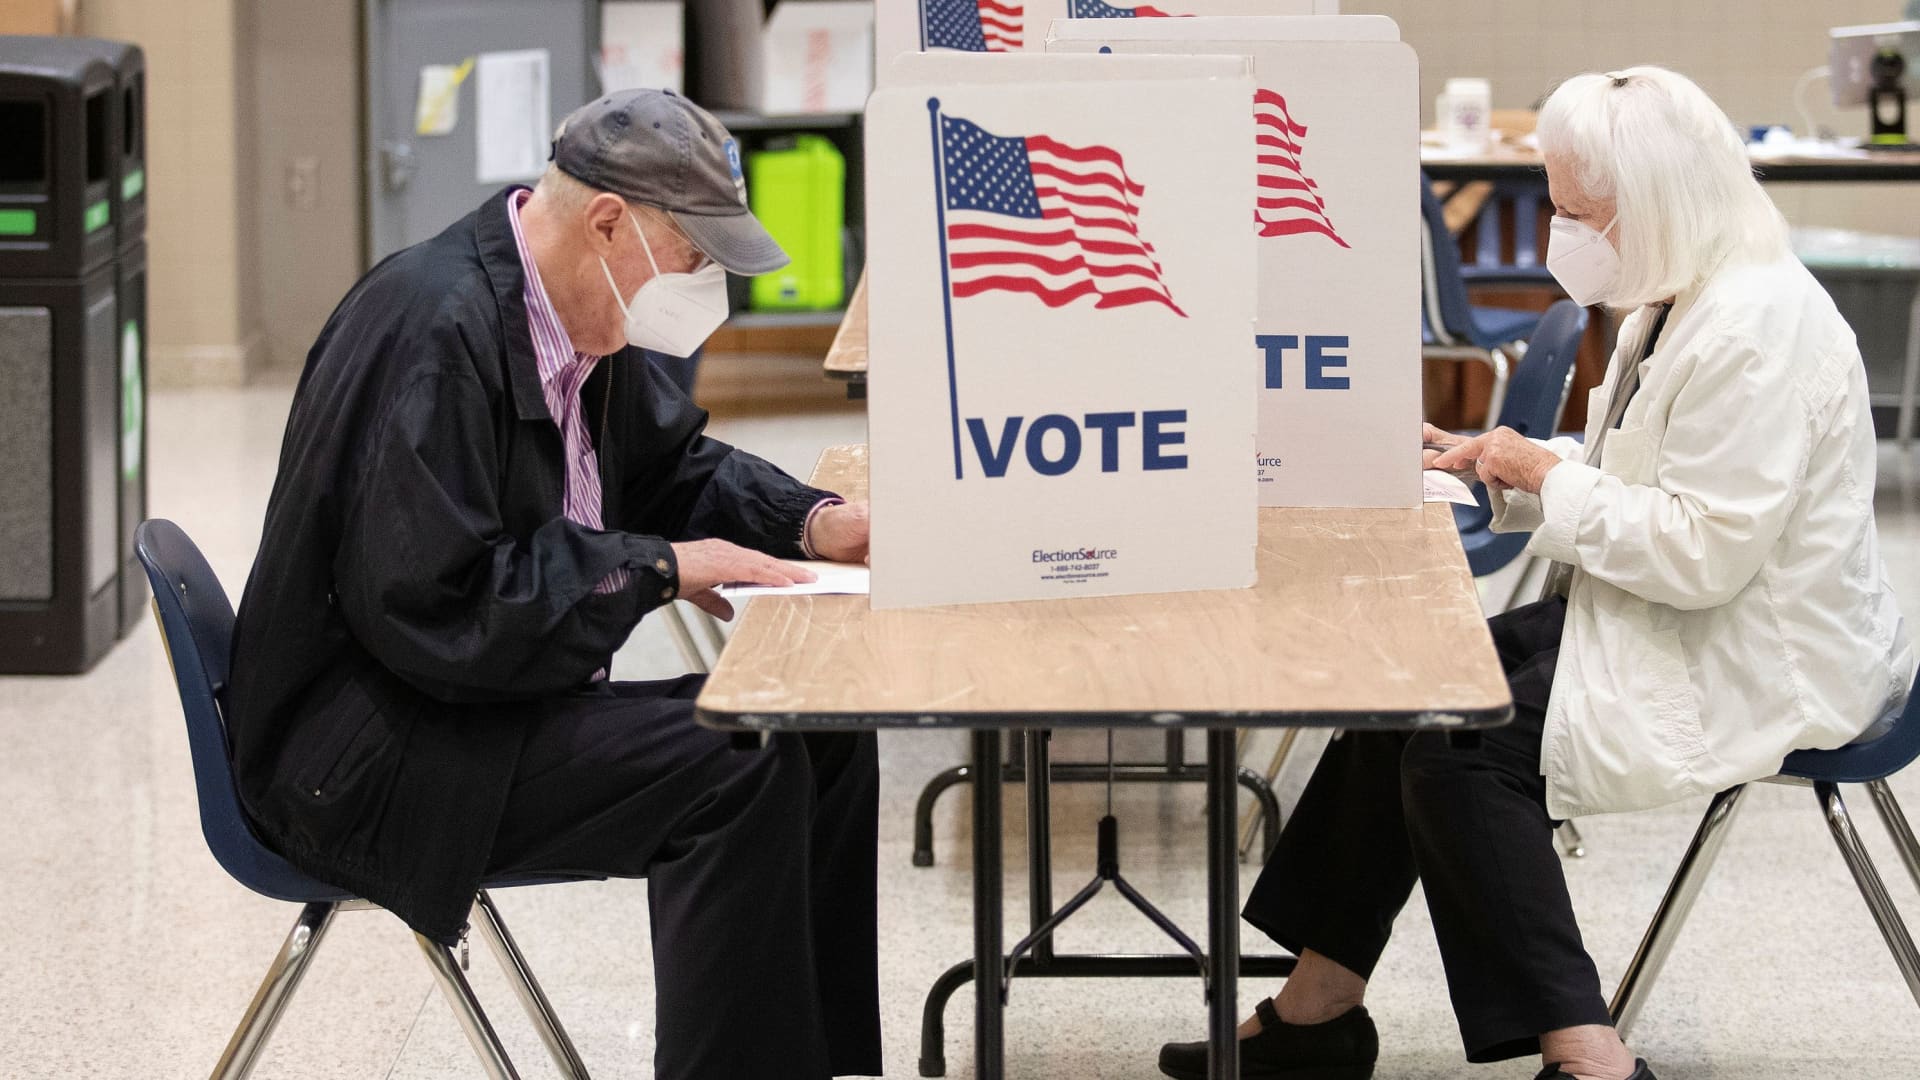 Former Associate Justice of the Supreme Court of the U.S. Anthony Kennedy and his wife, Mary Davis, cast their votes during the Virginia governor's race, at Langley High School in McLean, Virginia, on Nov. 2, 2021.